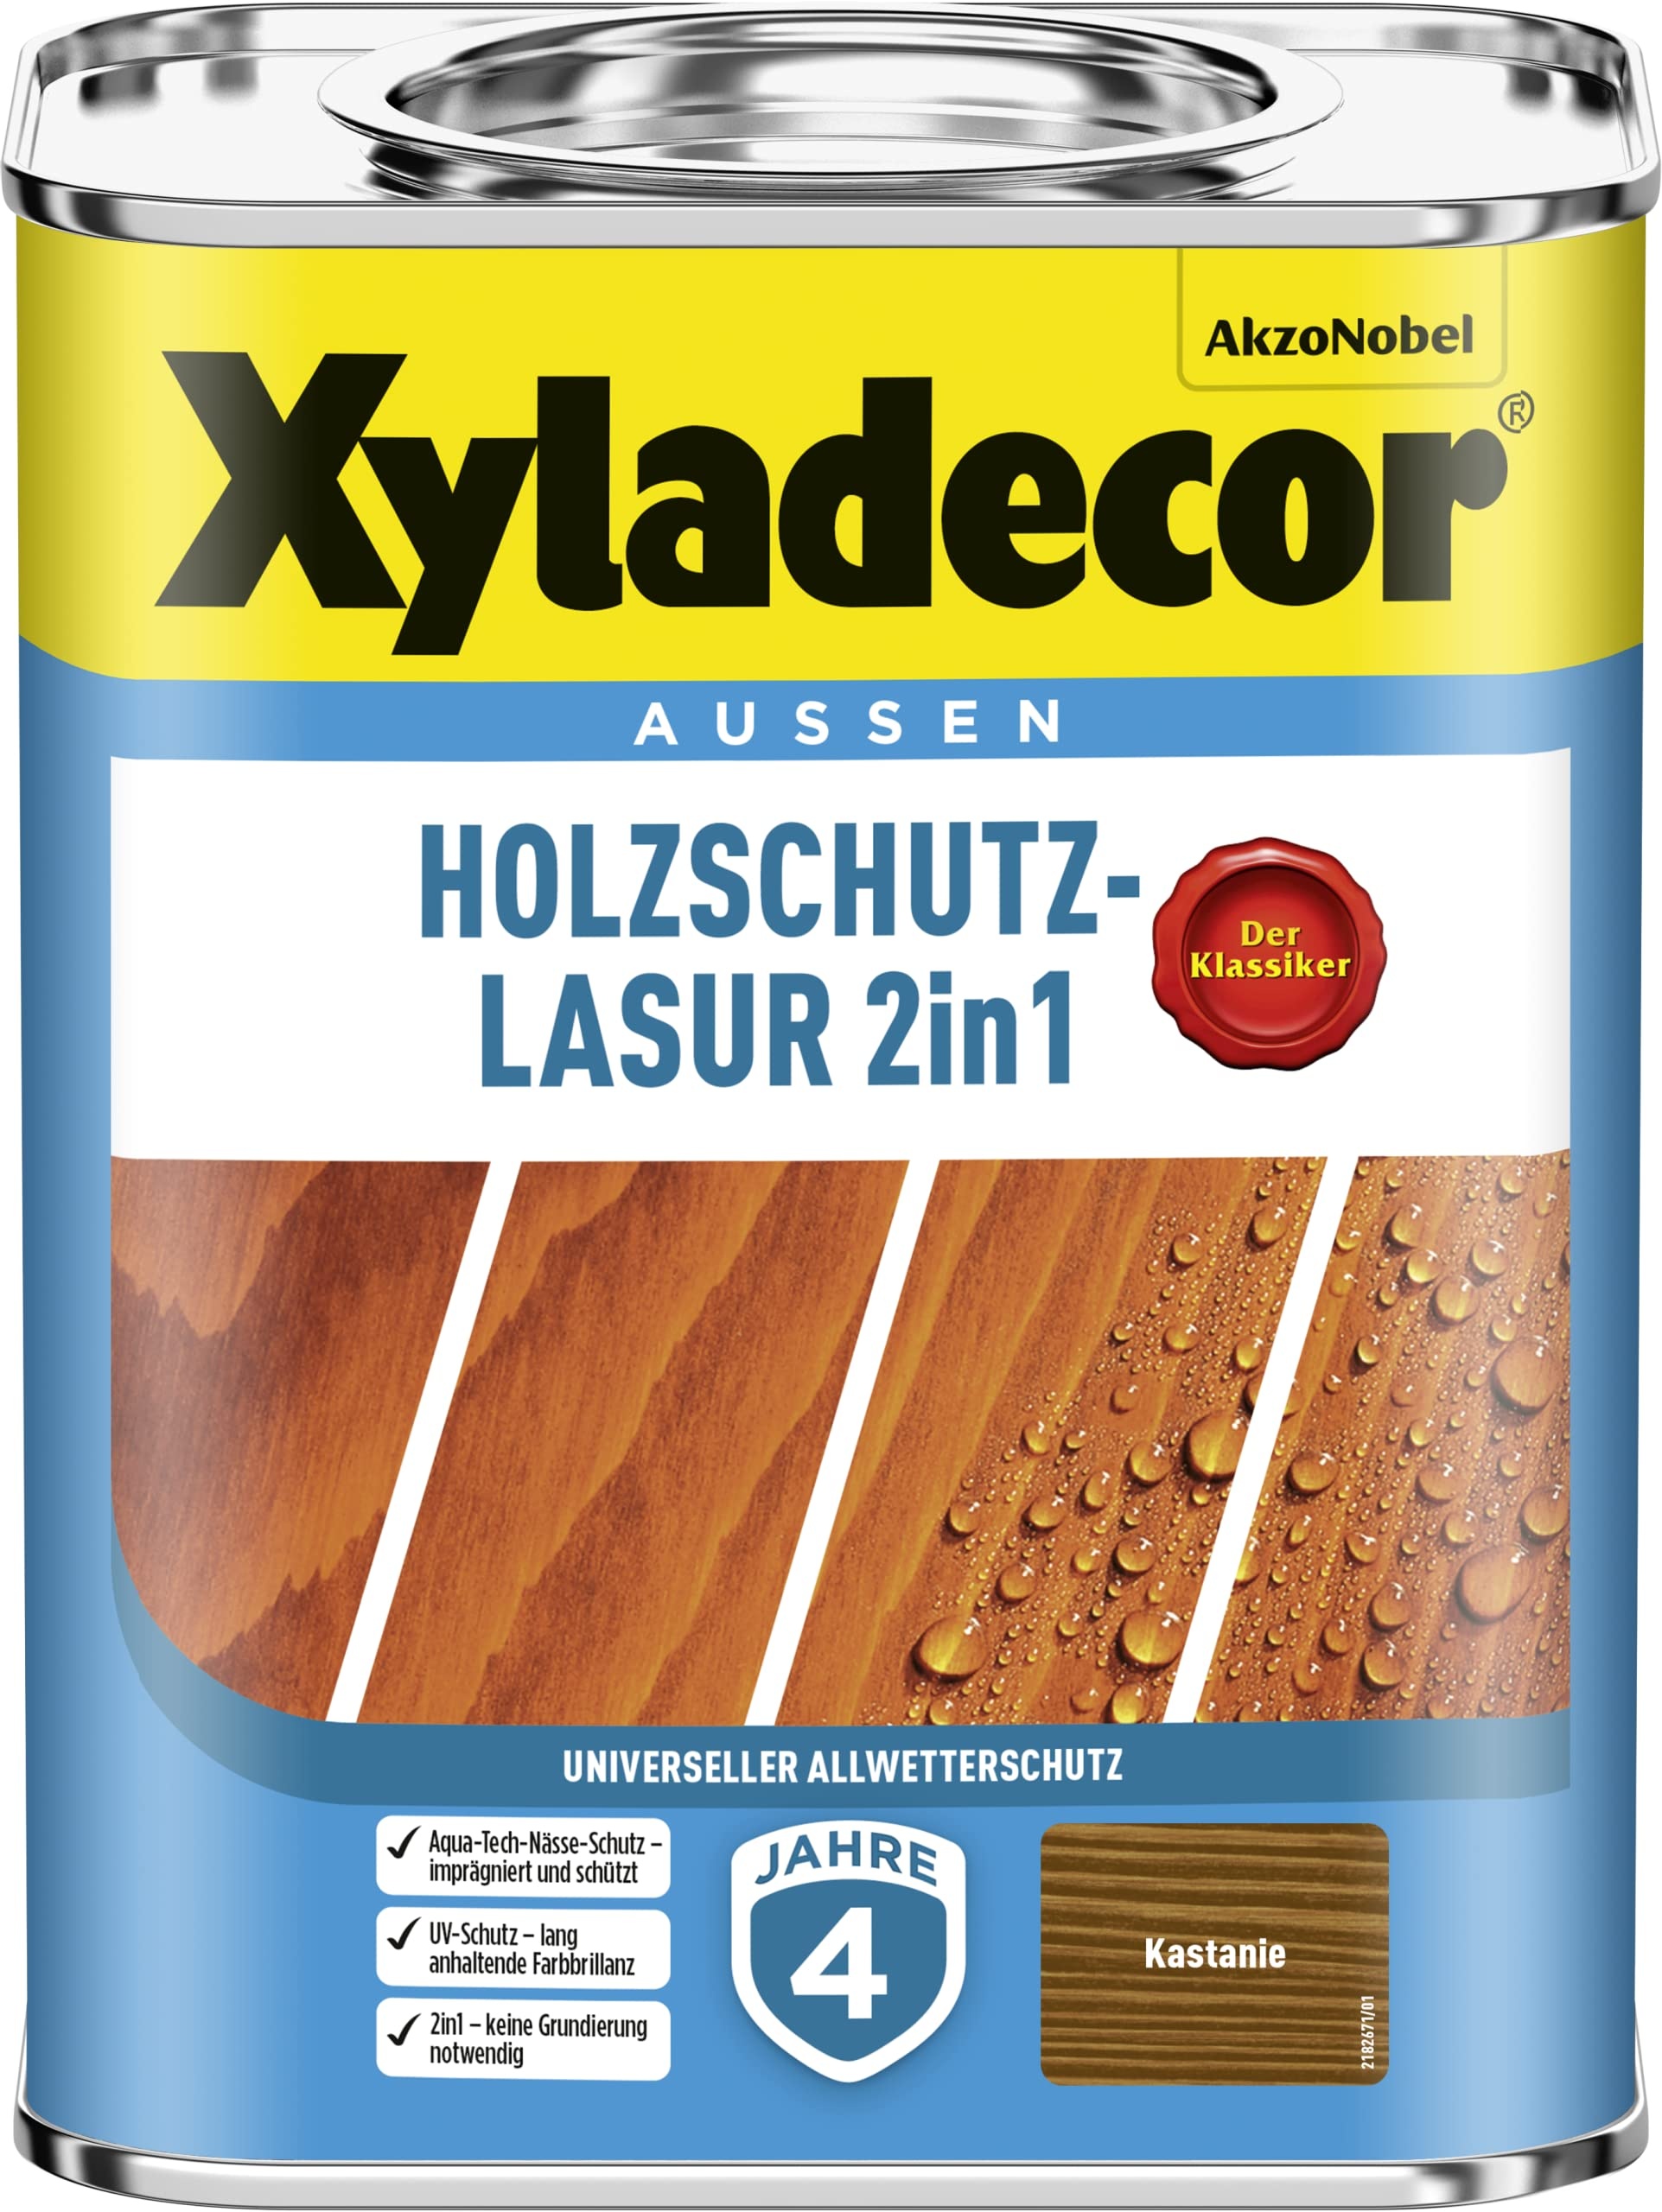 xyladecor 2 in 1